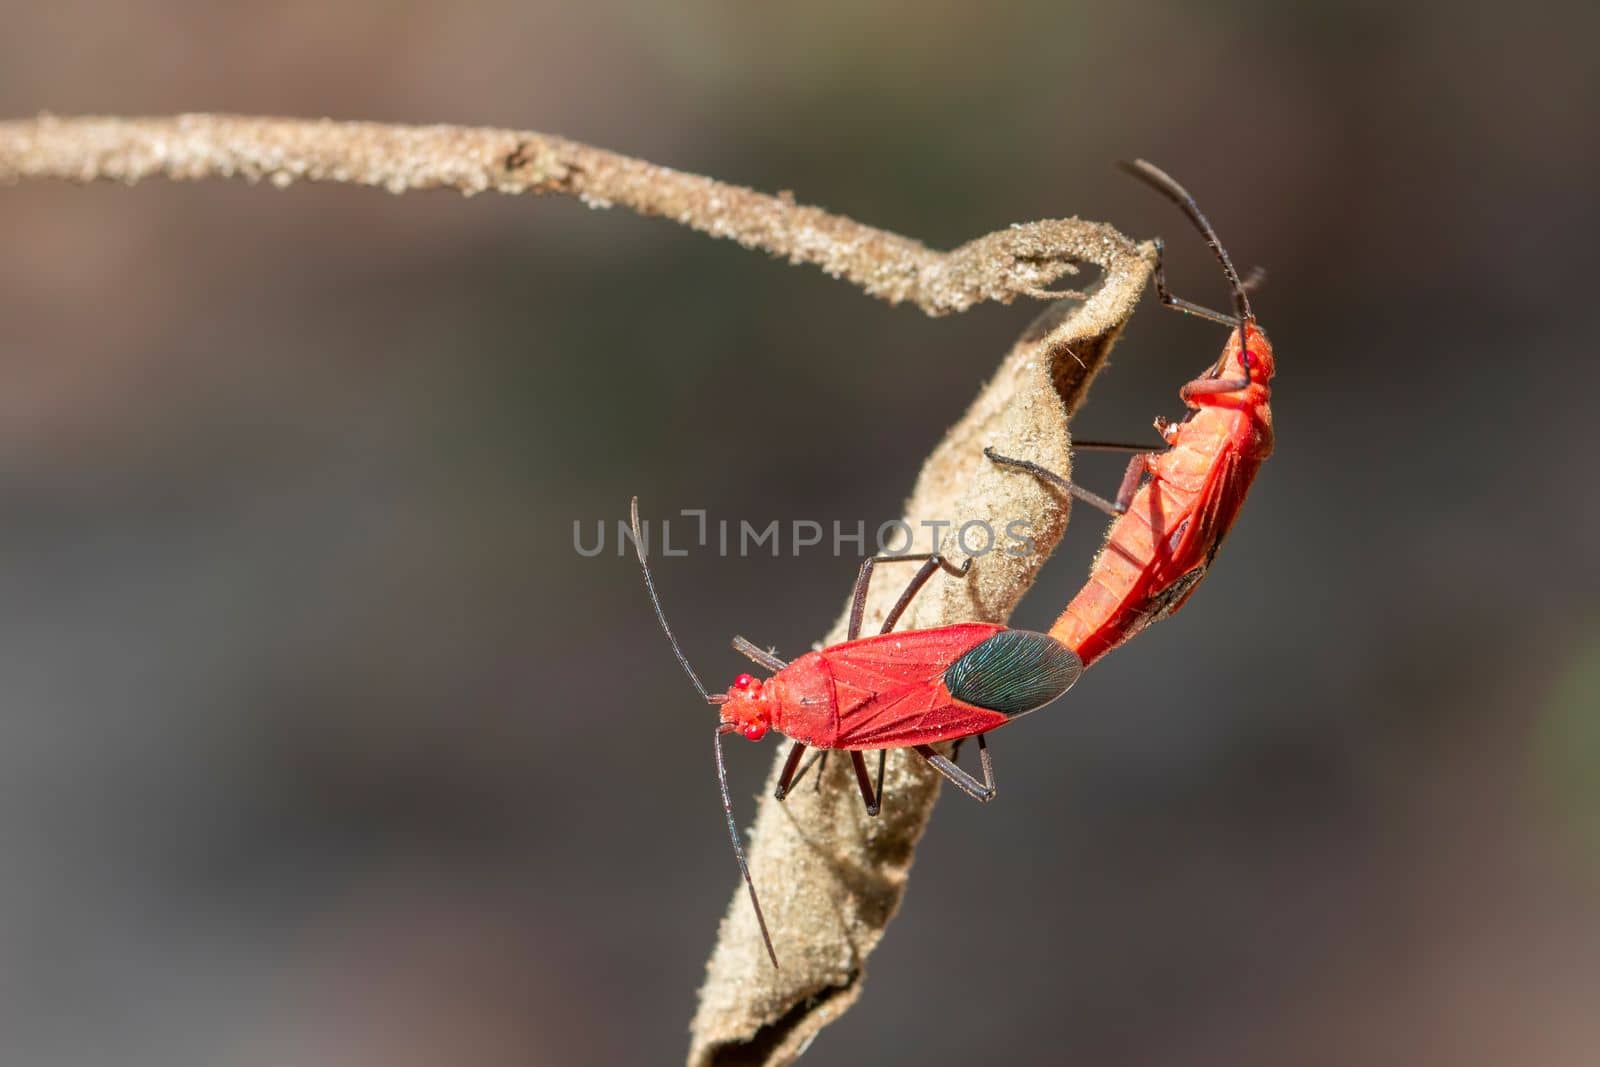 Image of Red cotton bug (Dysdercus cingulatus) on the leaf on a natural background. Insect. Animal. Pyrrhocoridae.